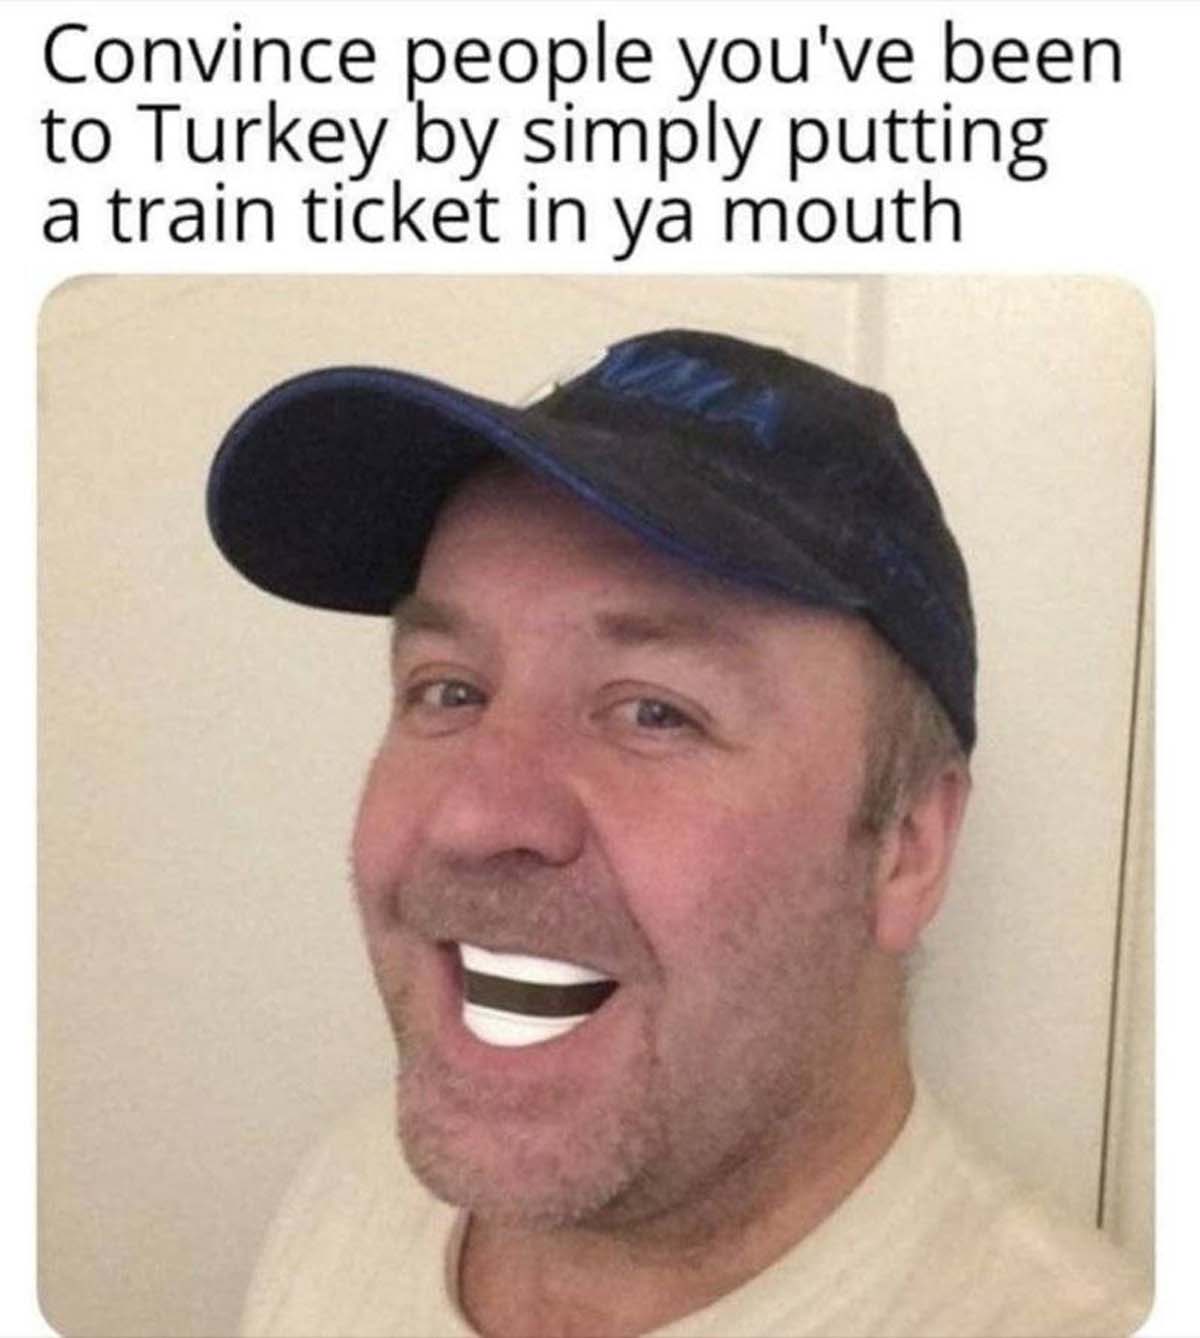 Internet meme - Convince people you've been to Turkey by simply putting a train ticket in ya mouth